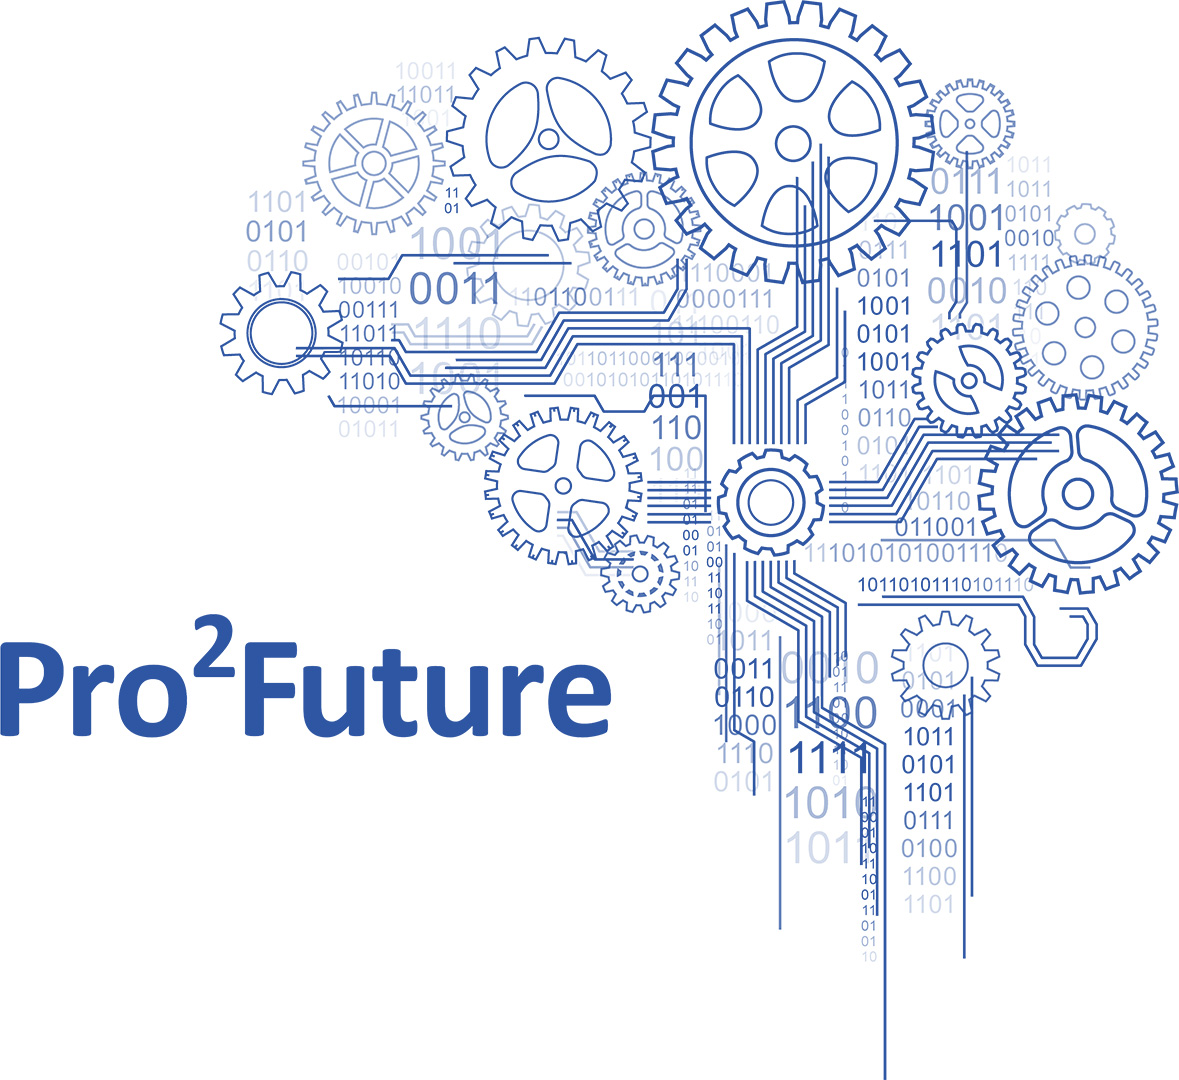 Pro²Future – Products and Production Systems of the Future - Pro2Future GmbH